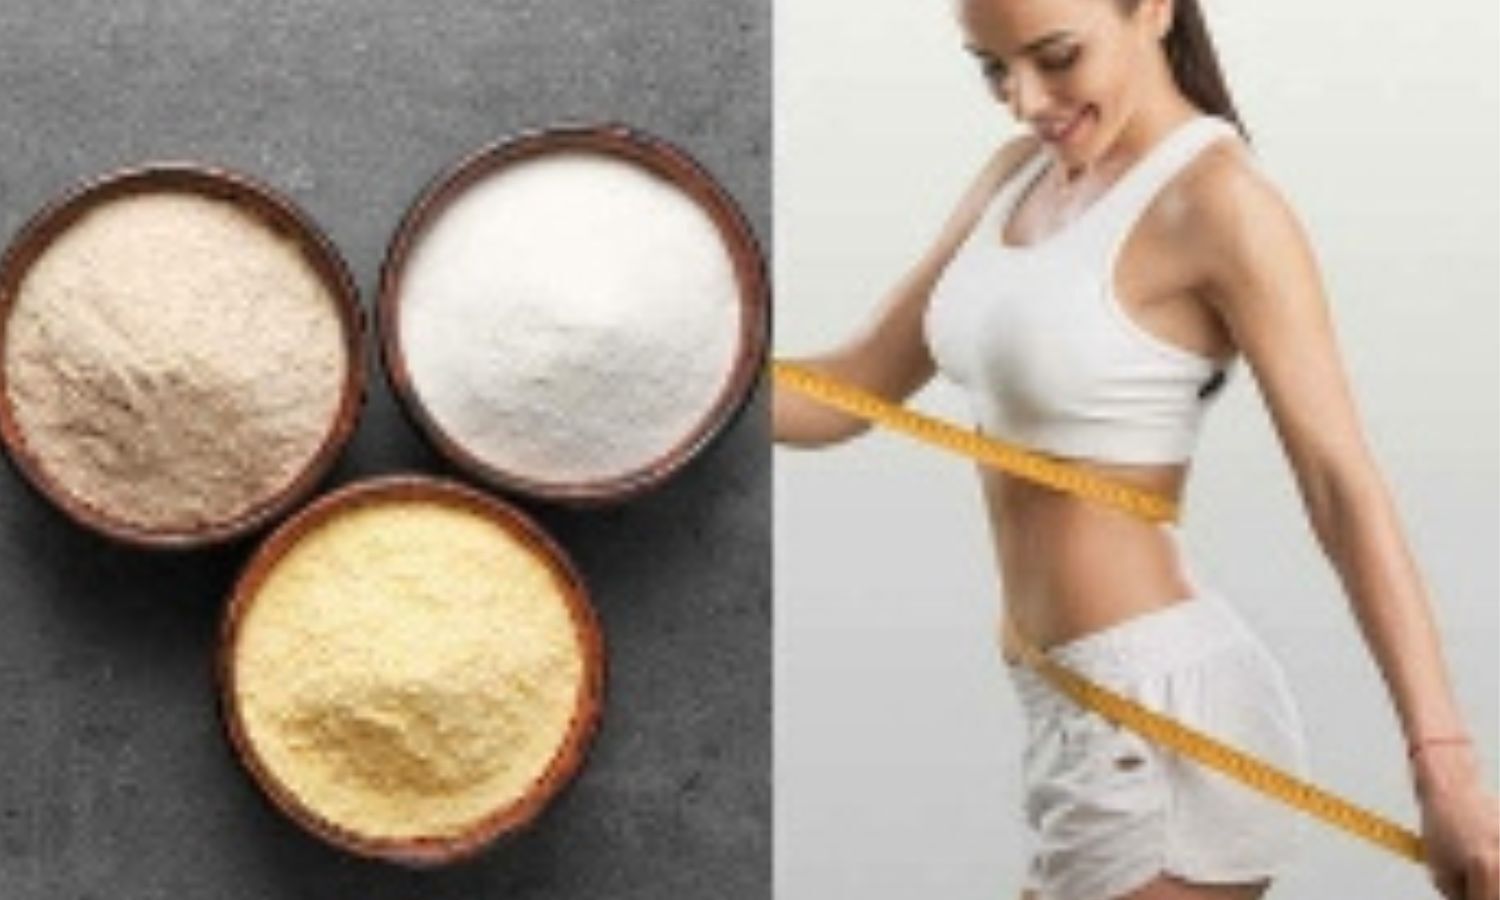 Weight Loss Powder Benefits: Now the weight will be reduced soon, by consuming these 4 powders you will be thin